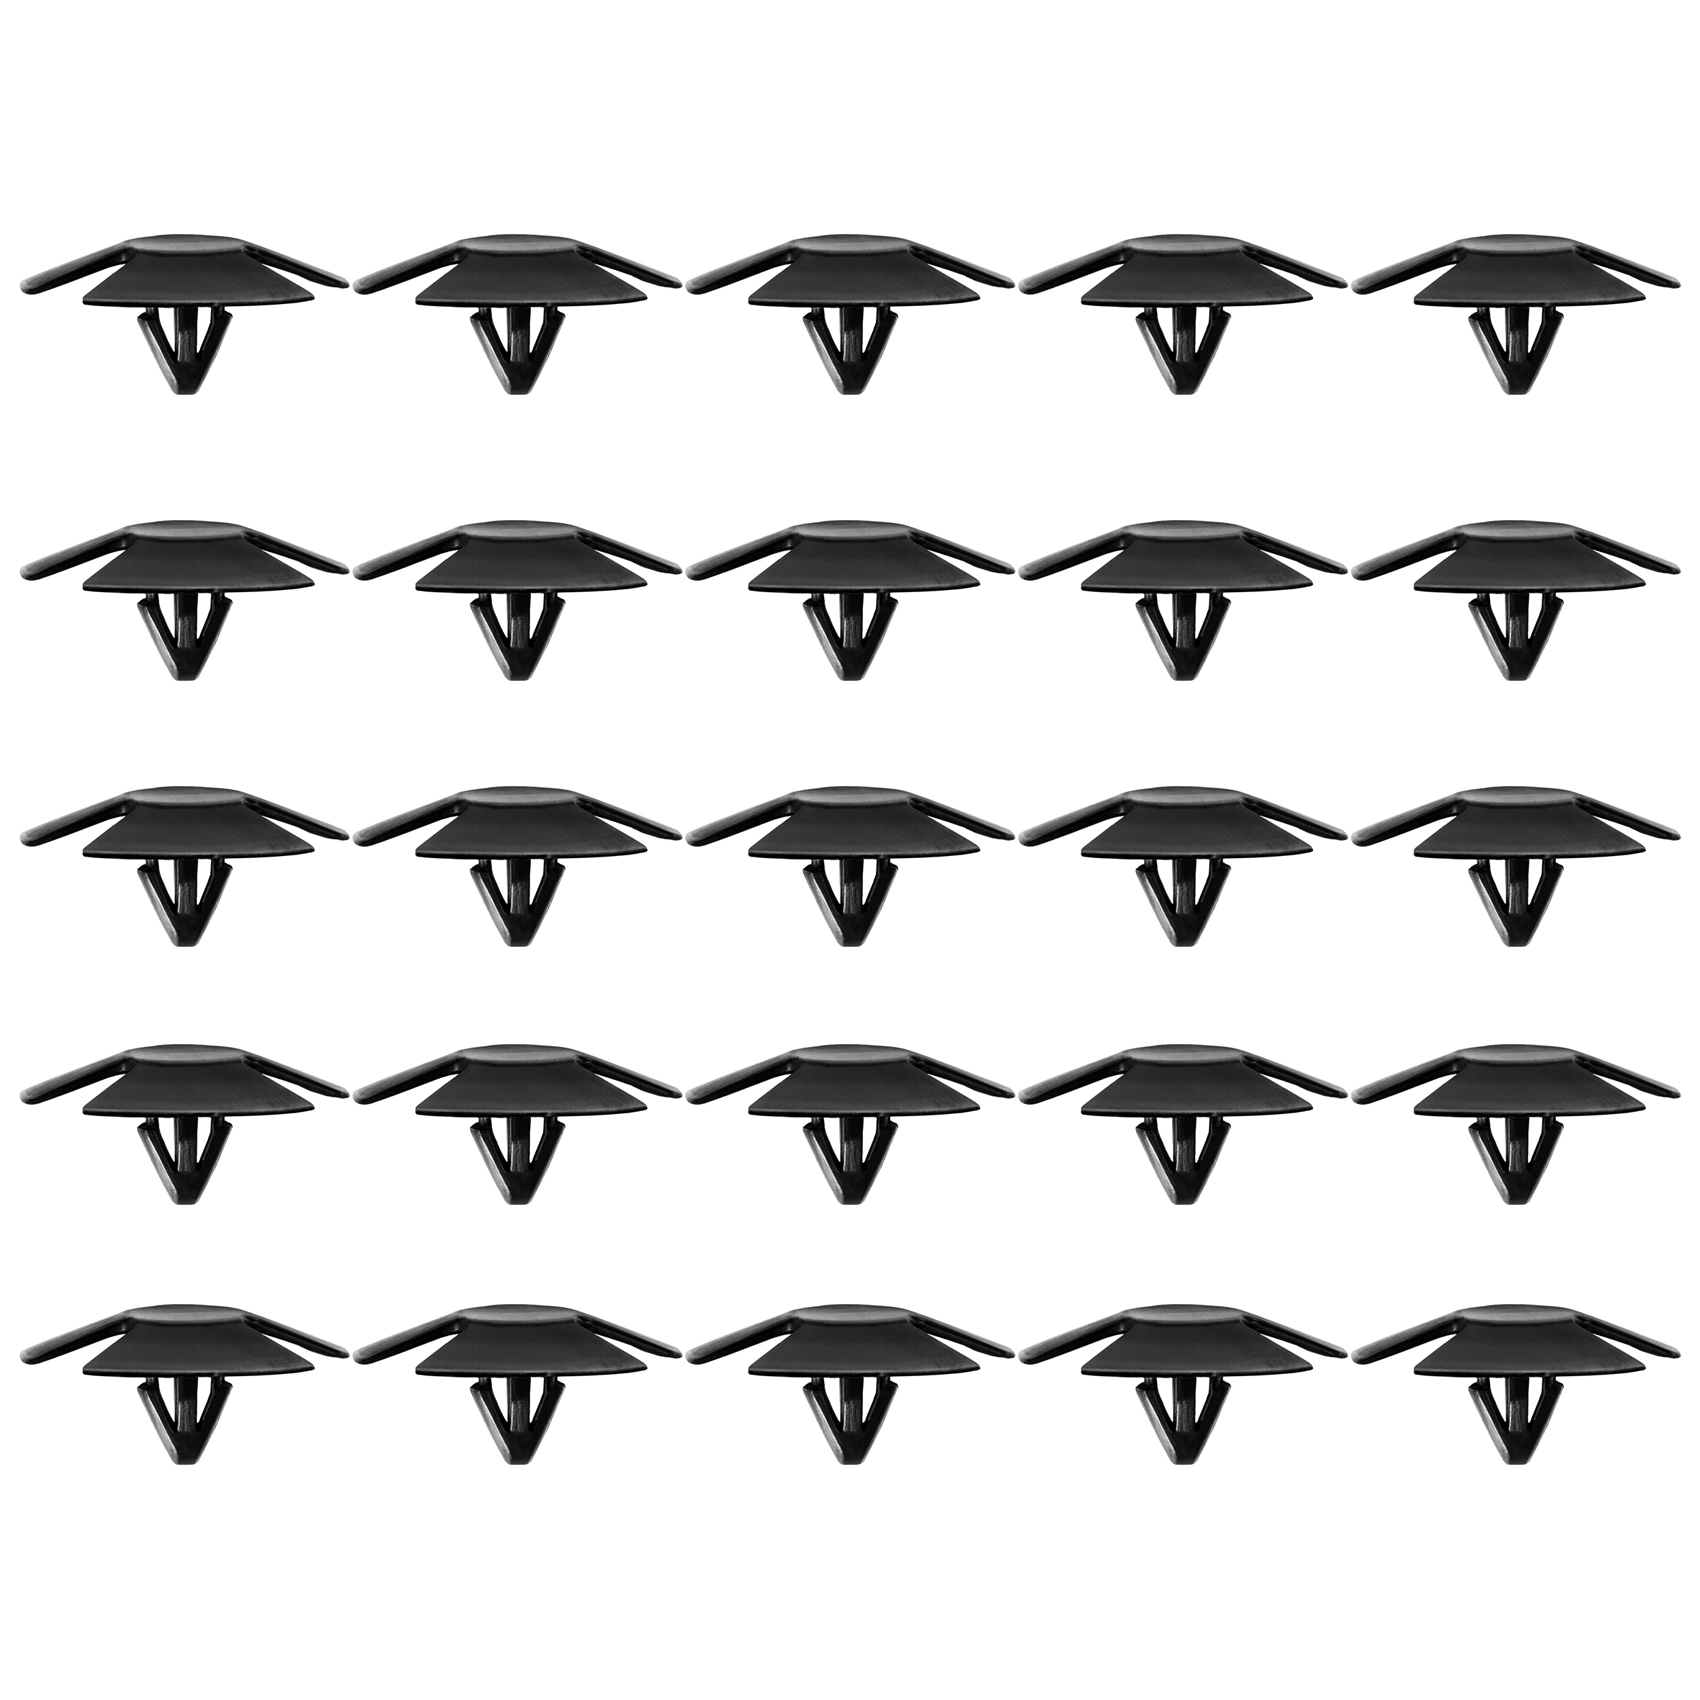 25Pcs Car Bumper Hood Insulation Cover Retainer Clips for Chrysle, JEEP, Dodge, Ram,4878883AA Rivet Fastener